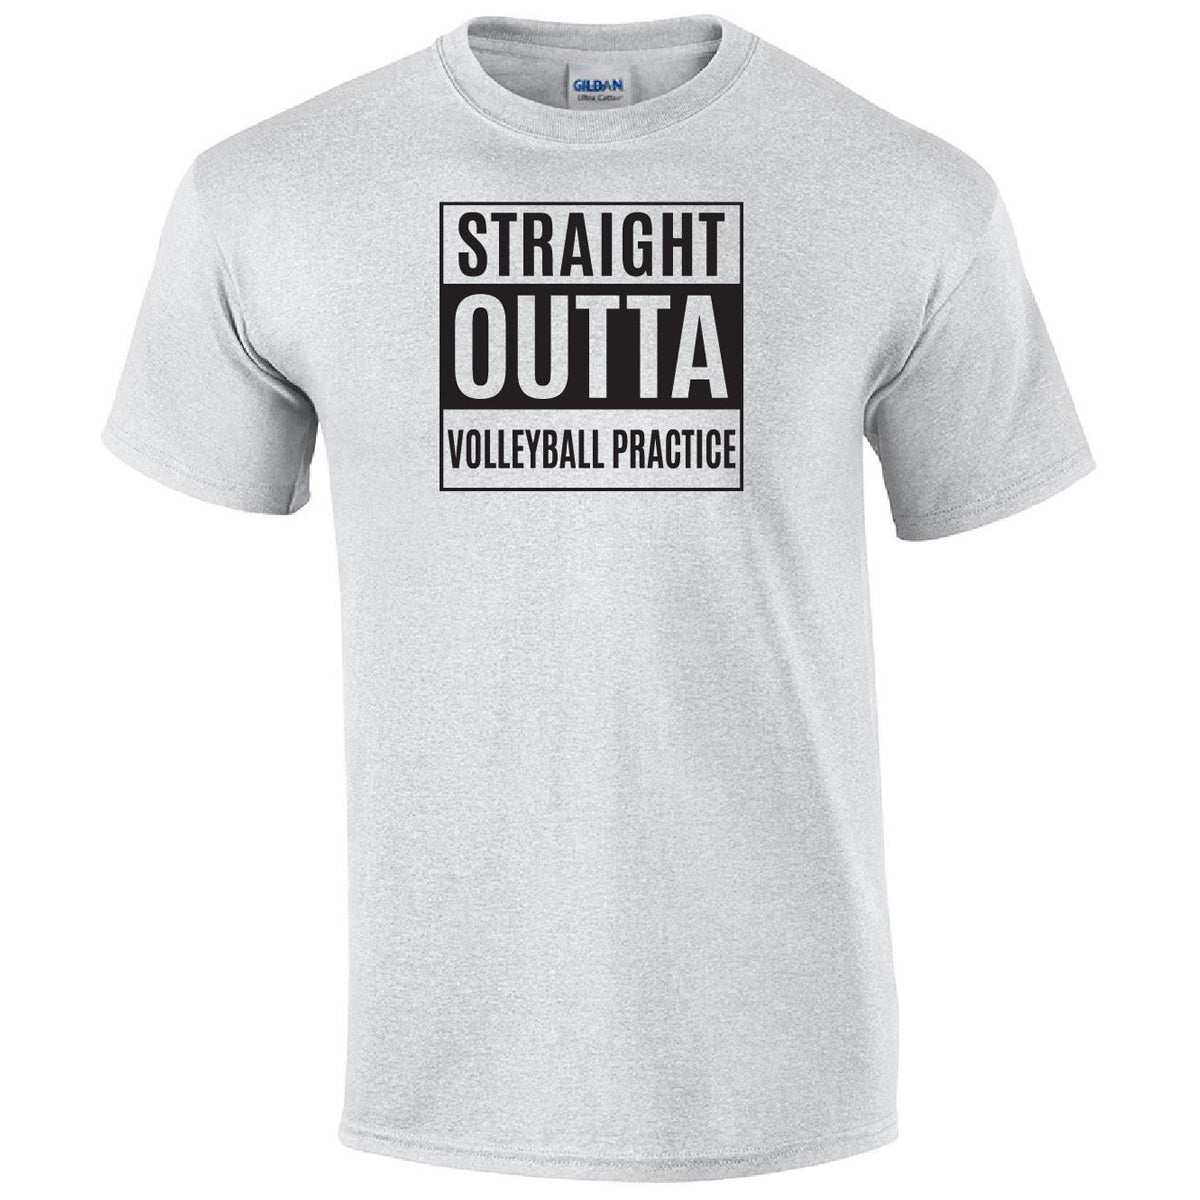 Straight Outta Volleyball Practice Printed Tee Humorous Shirt 411 Youth Medium Ash 